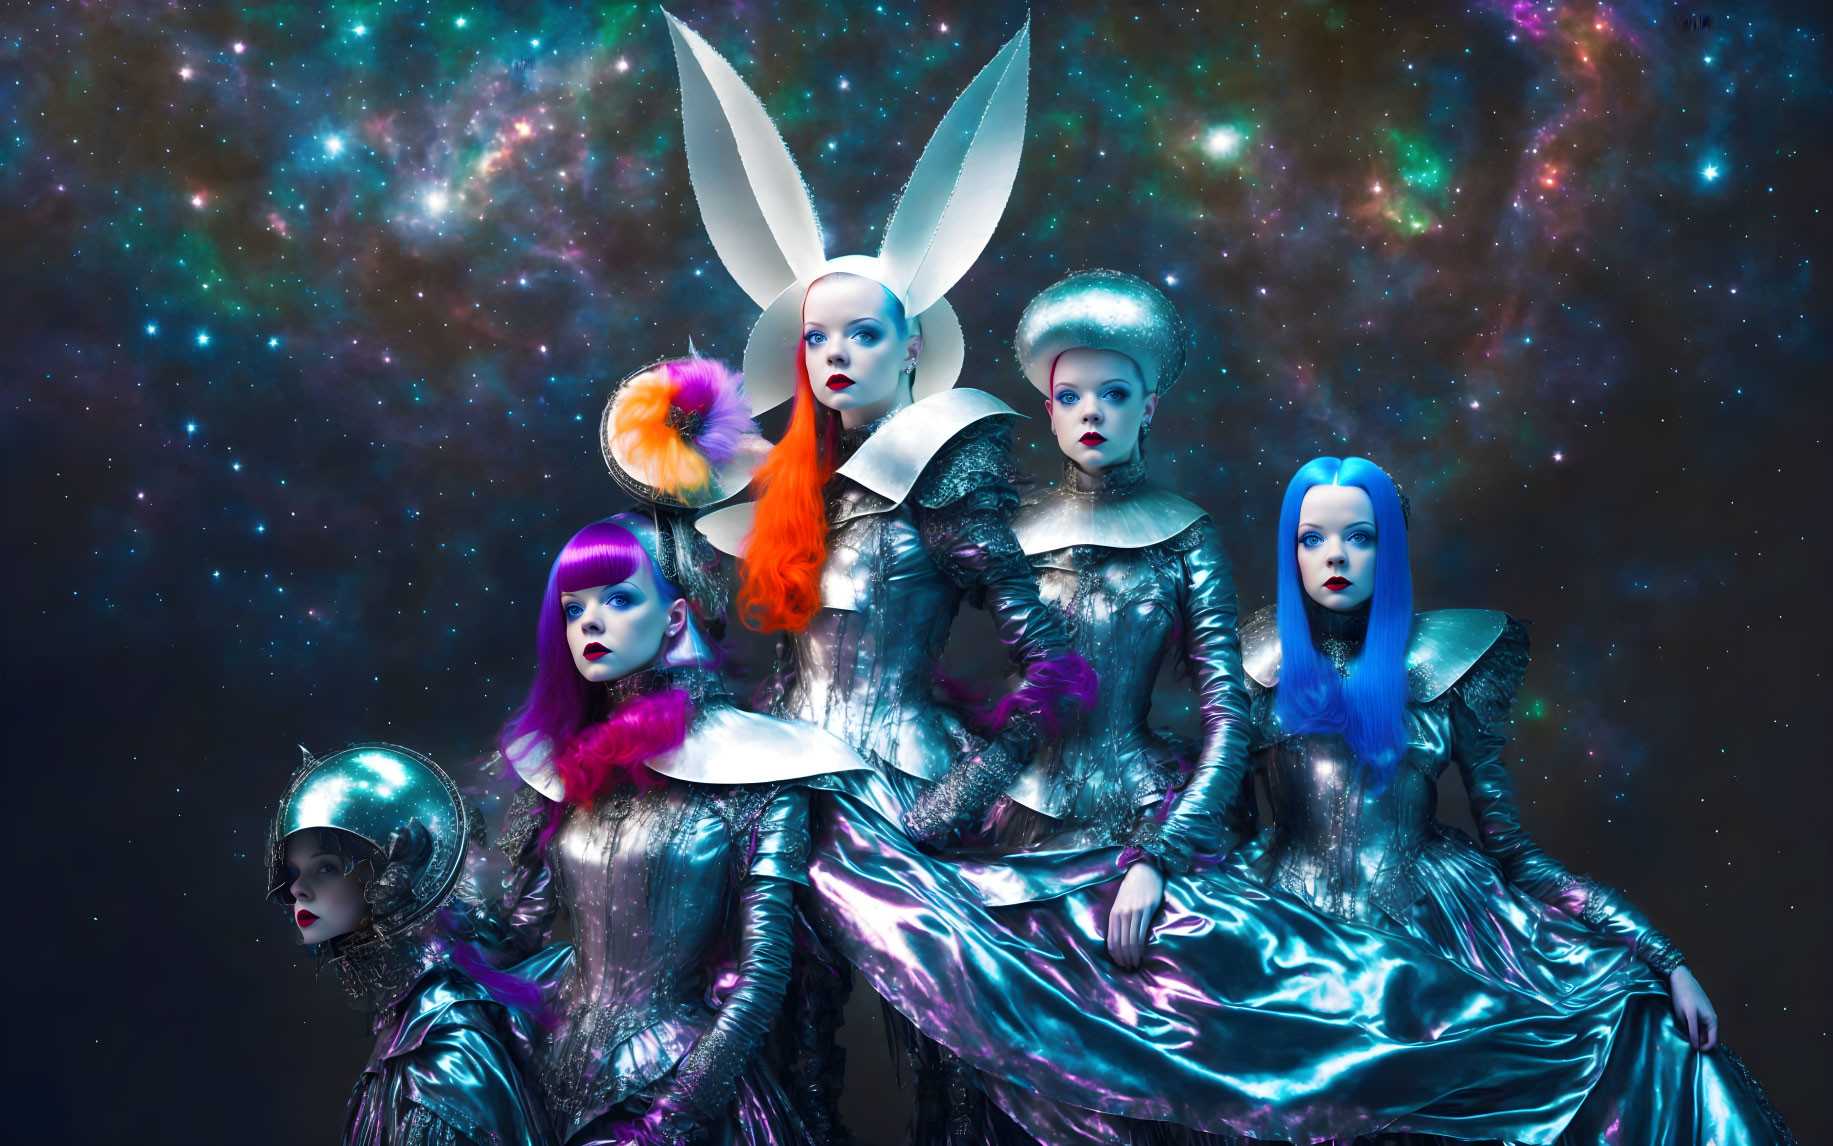 Five models in futuristic makeup and metallic outfits against a cosmic backdrop